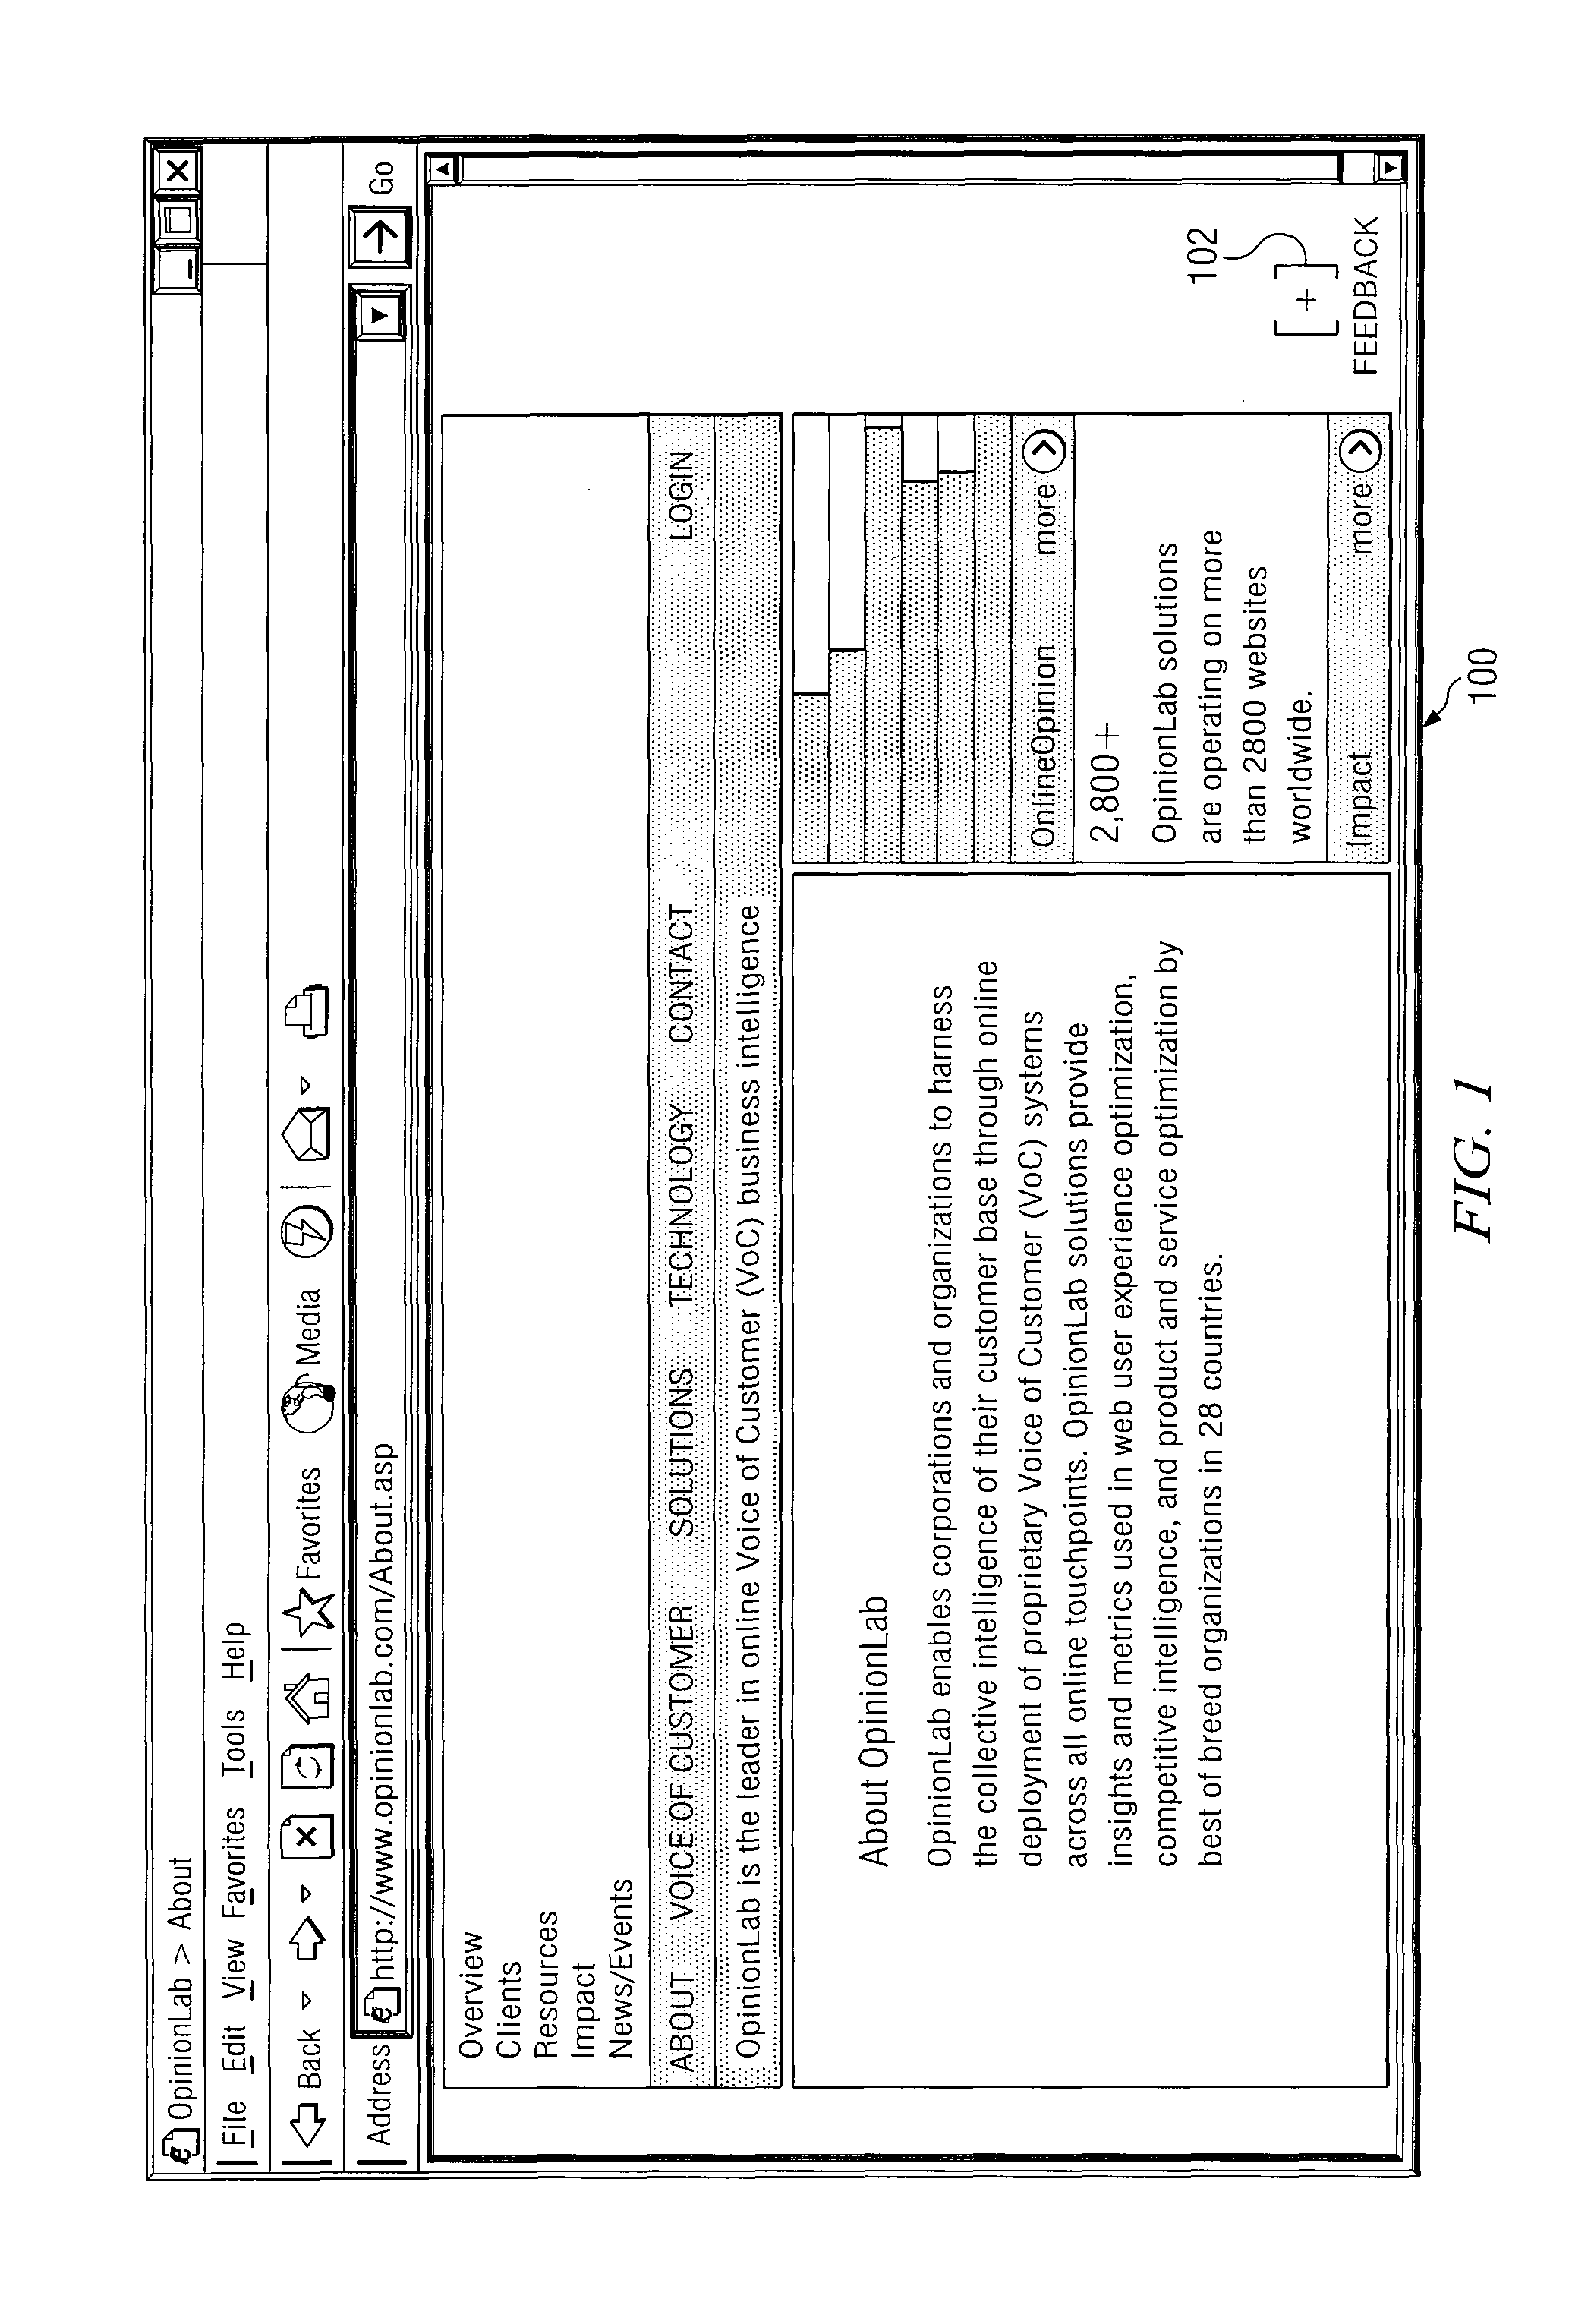 Computer-implemented system and method for measuring and reporting business intelligence based on comments collected from web page users using software associated with accessed web pages